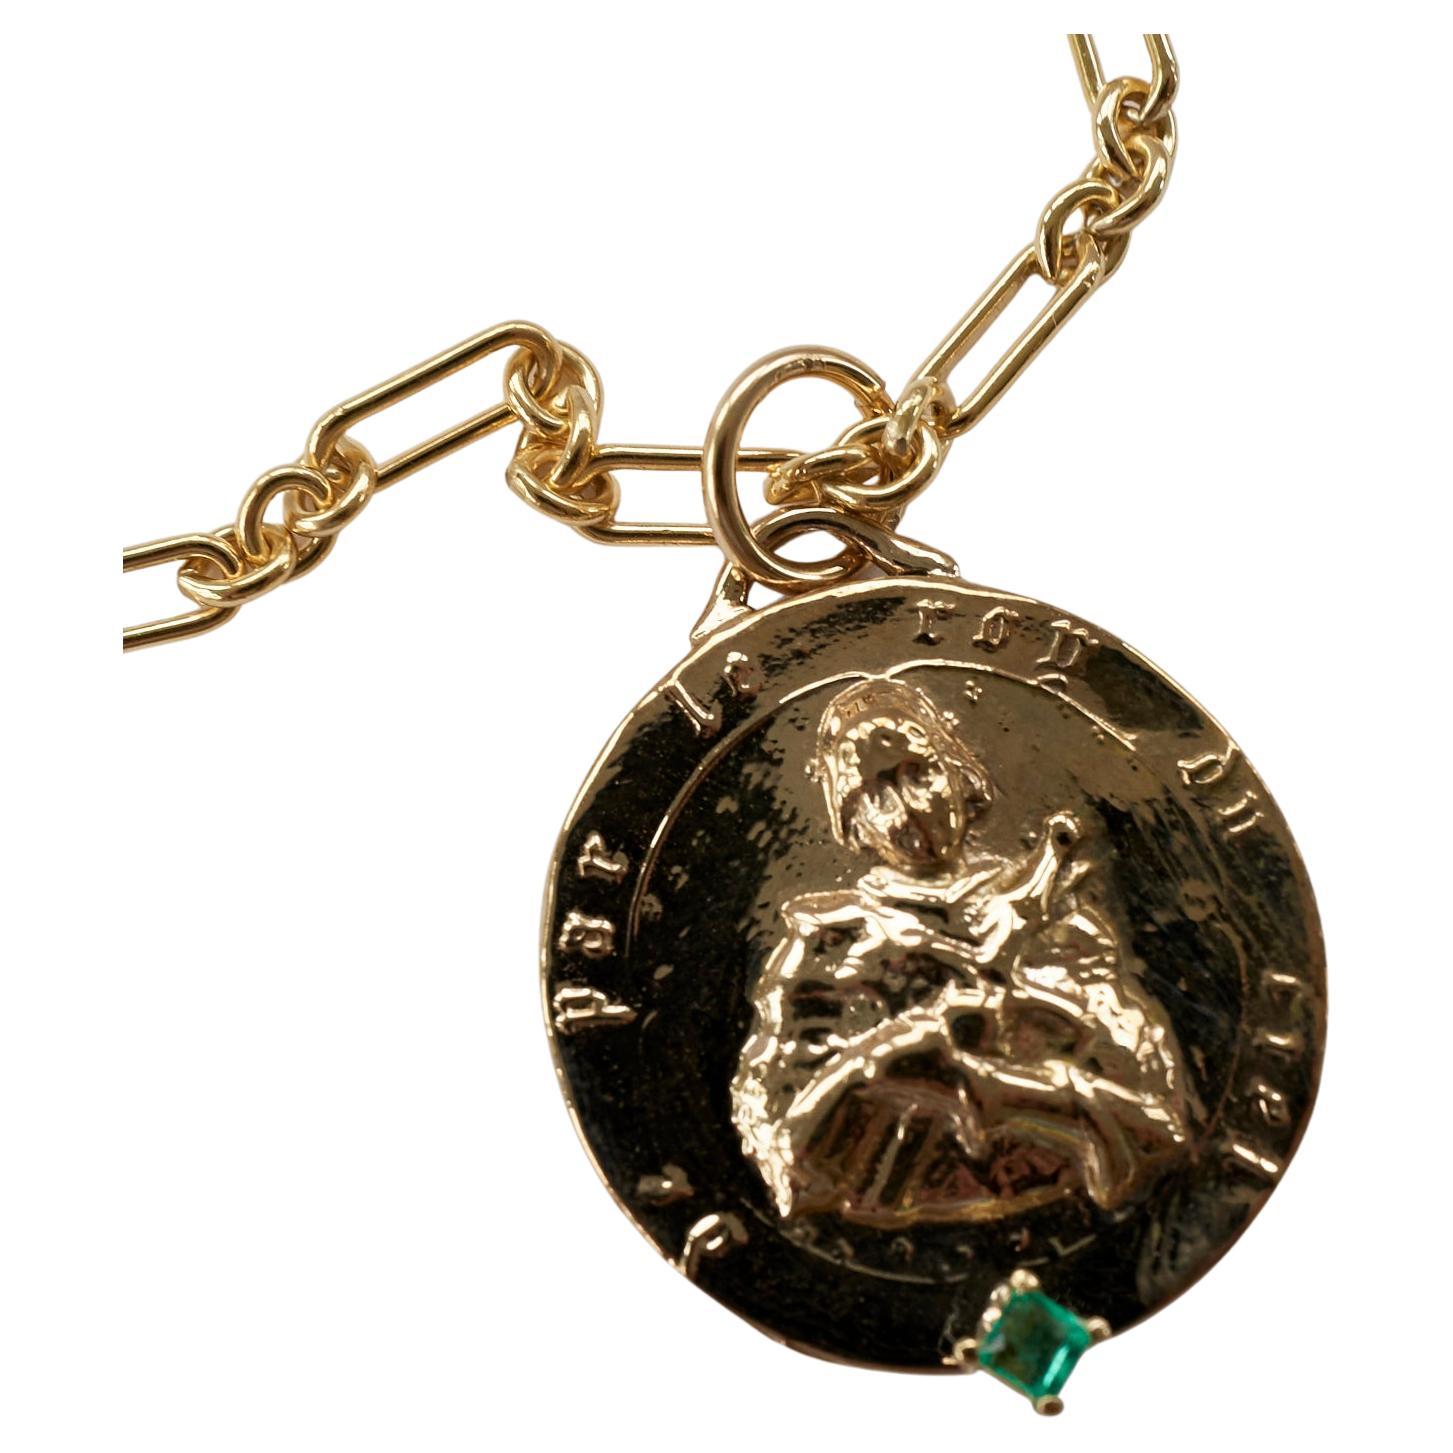 Emerald Chunky Chain Necklace Medal Coin Pendant Joan of Arc J Dauphin